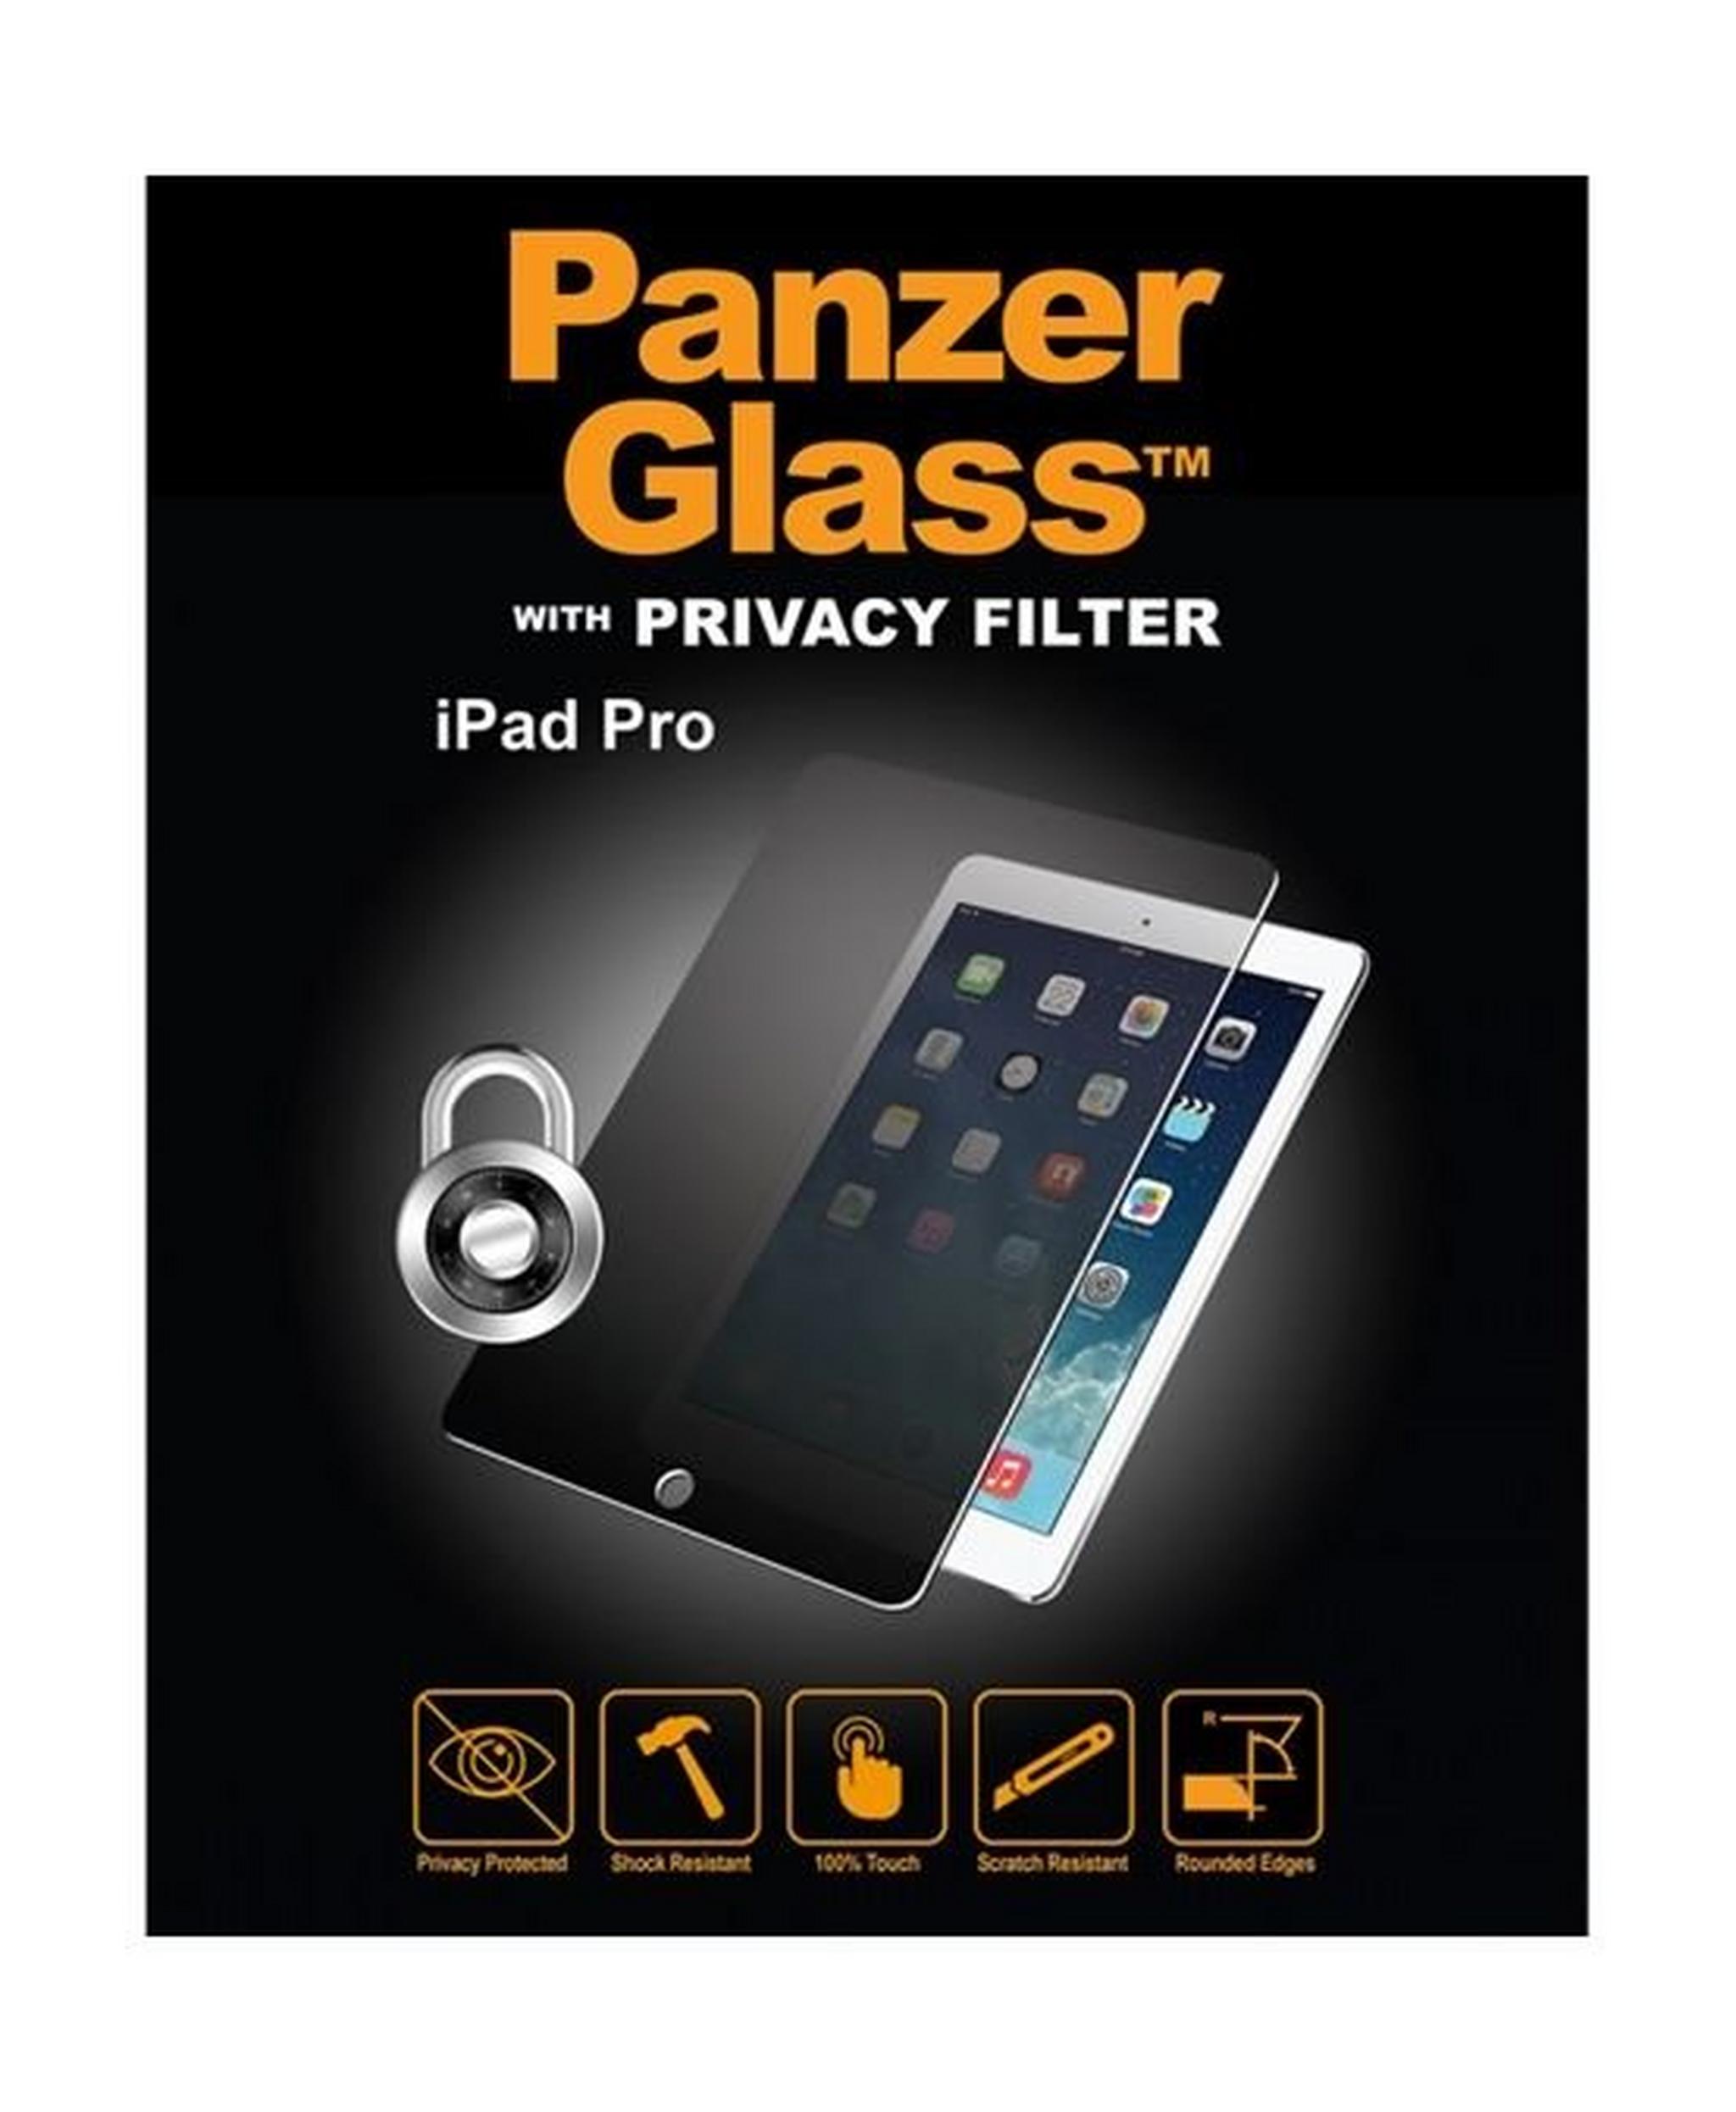 Panzer Glass Screen Protector with Privacy Filter for iPad Pro (27102)